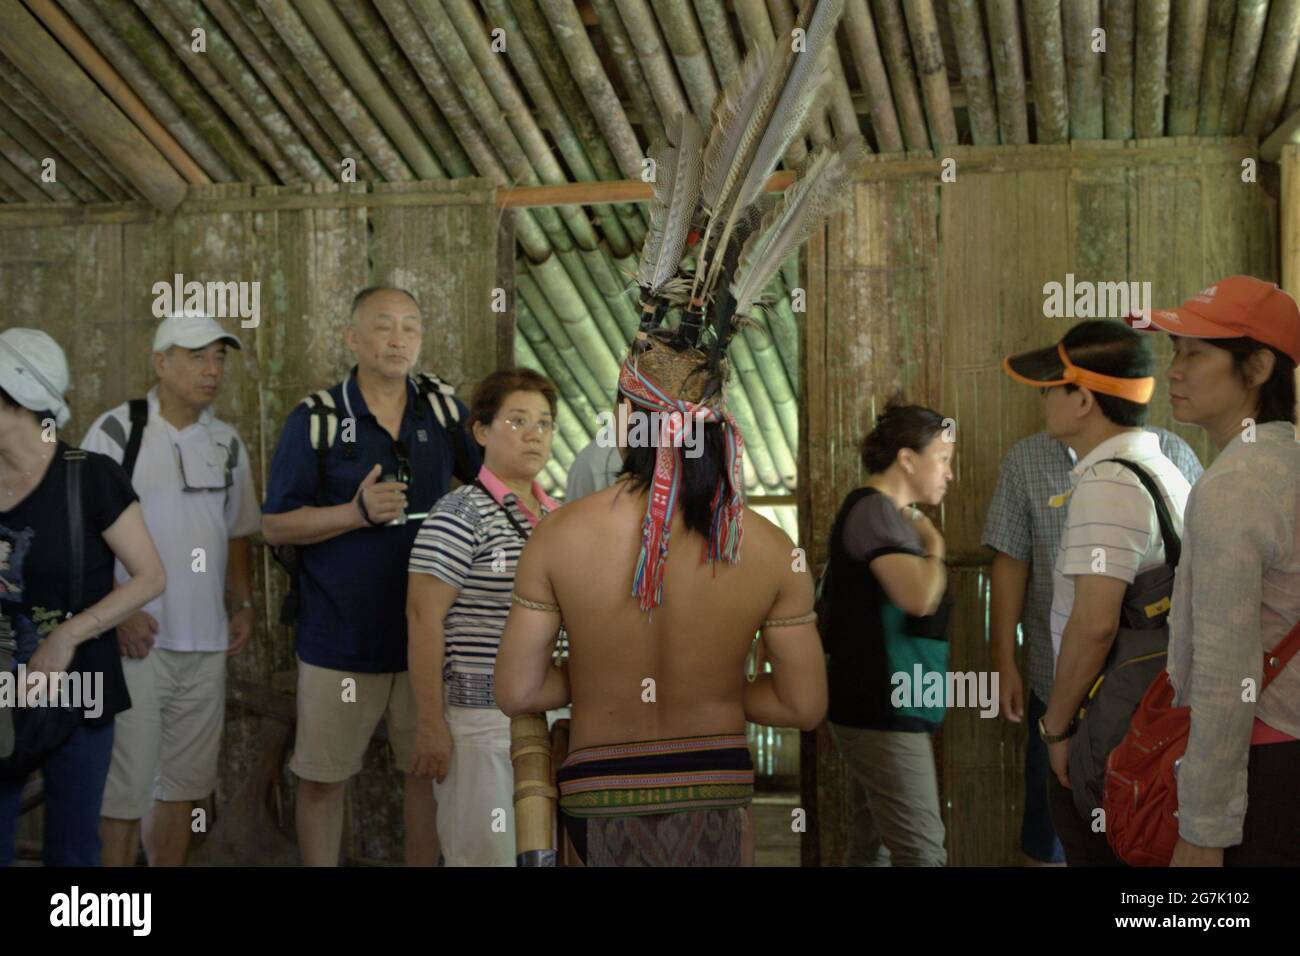 A tourism worker wearing indigenous attire is giving explanations to tourists at Mari Mari Cultural Village, a village that is designed to showcase the cultures of five ethnic groups of Sabah—a Malaysian state in North Borneo, which is located on the outskirts of Kota Kinabalu in Sabah, Malaysia. Stock Photo